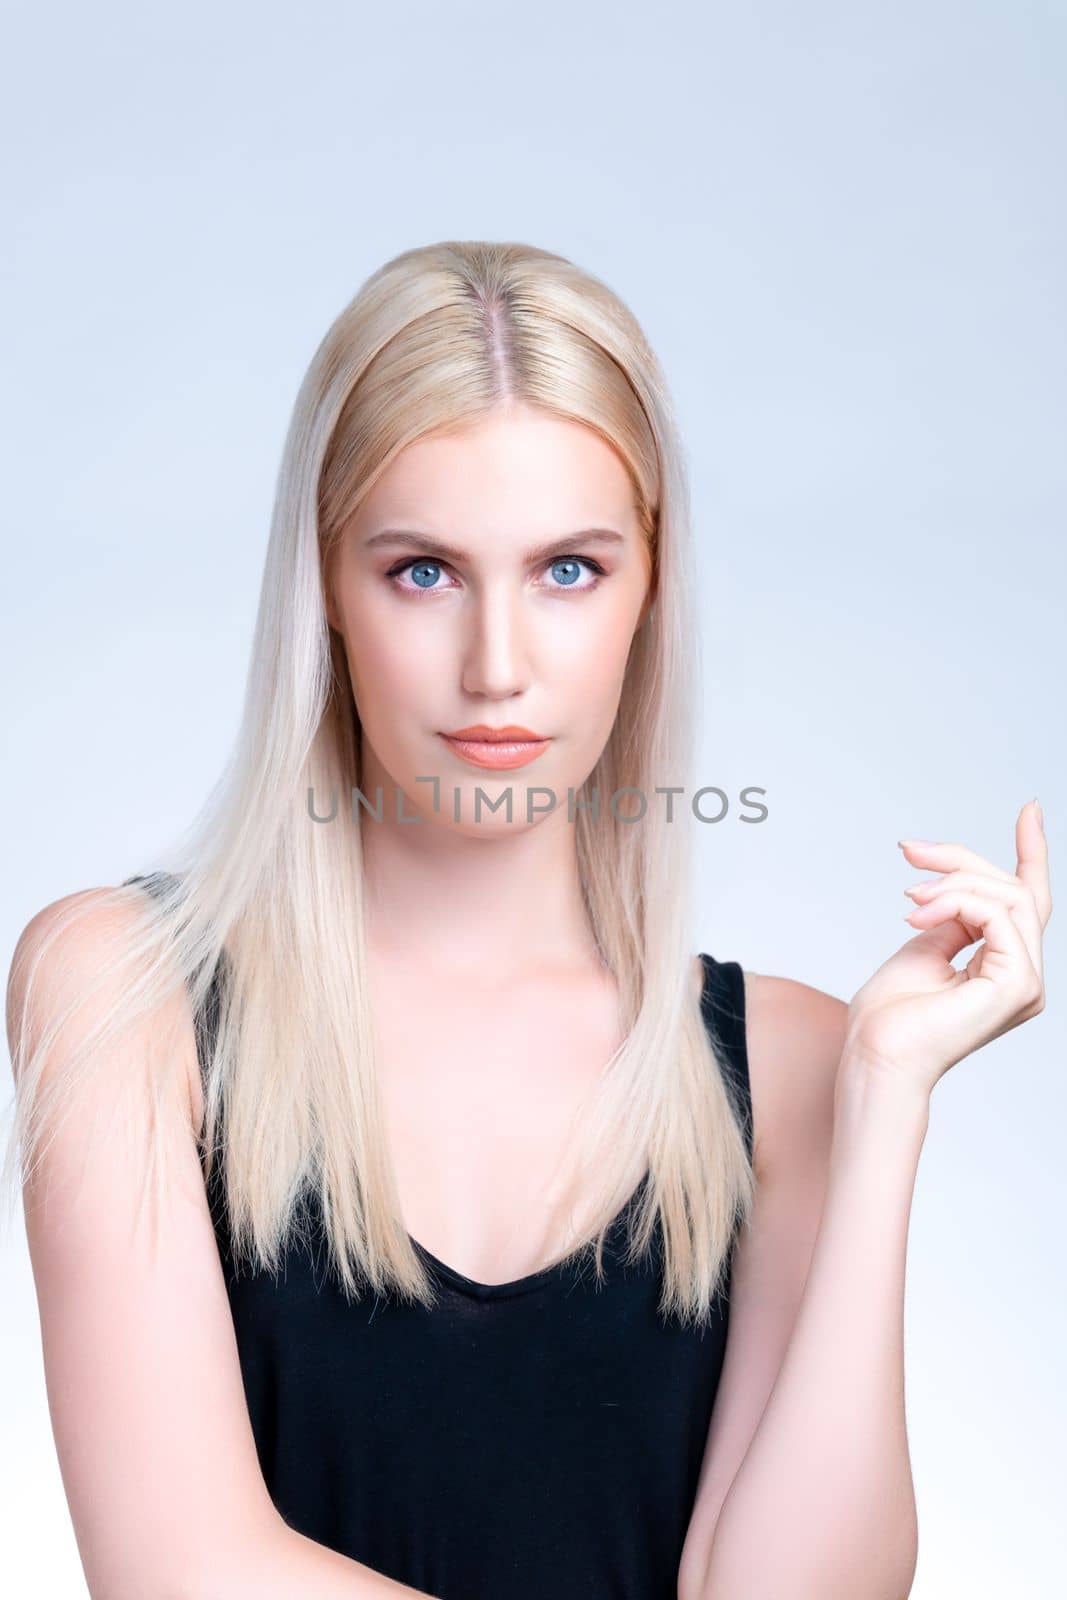 Pretty personable beautiful woman portrait with perfect smooth clean skin and natural makeup portrait in isolated background. Hand gesture with expressive facial expression for beauty model concept.